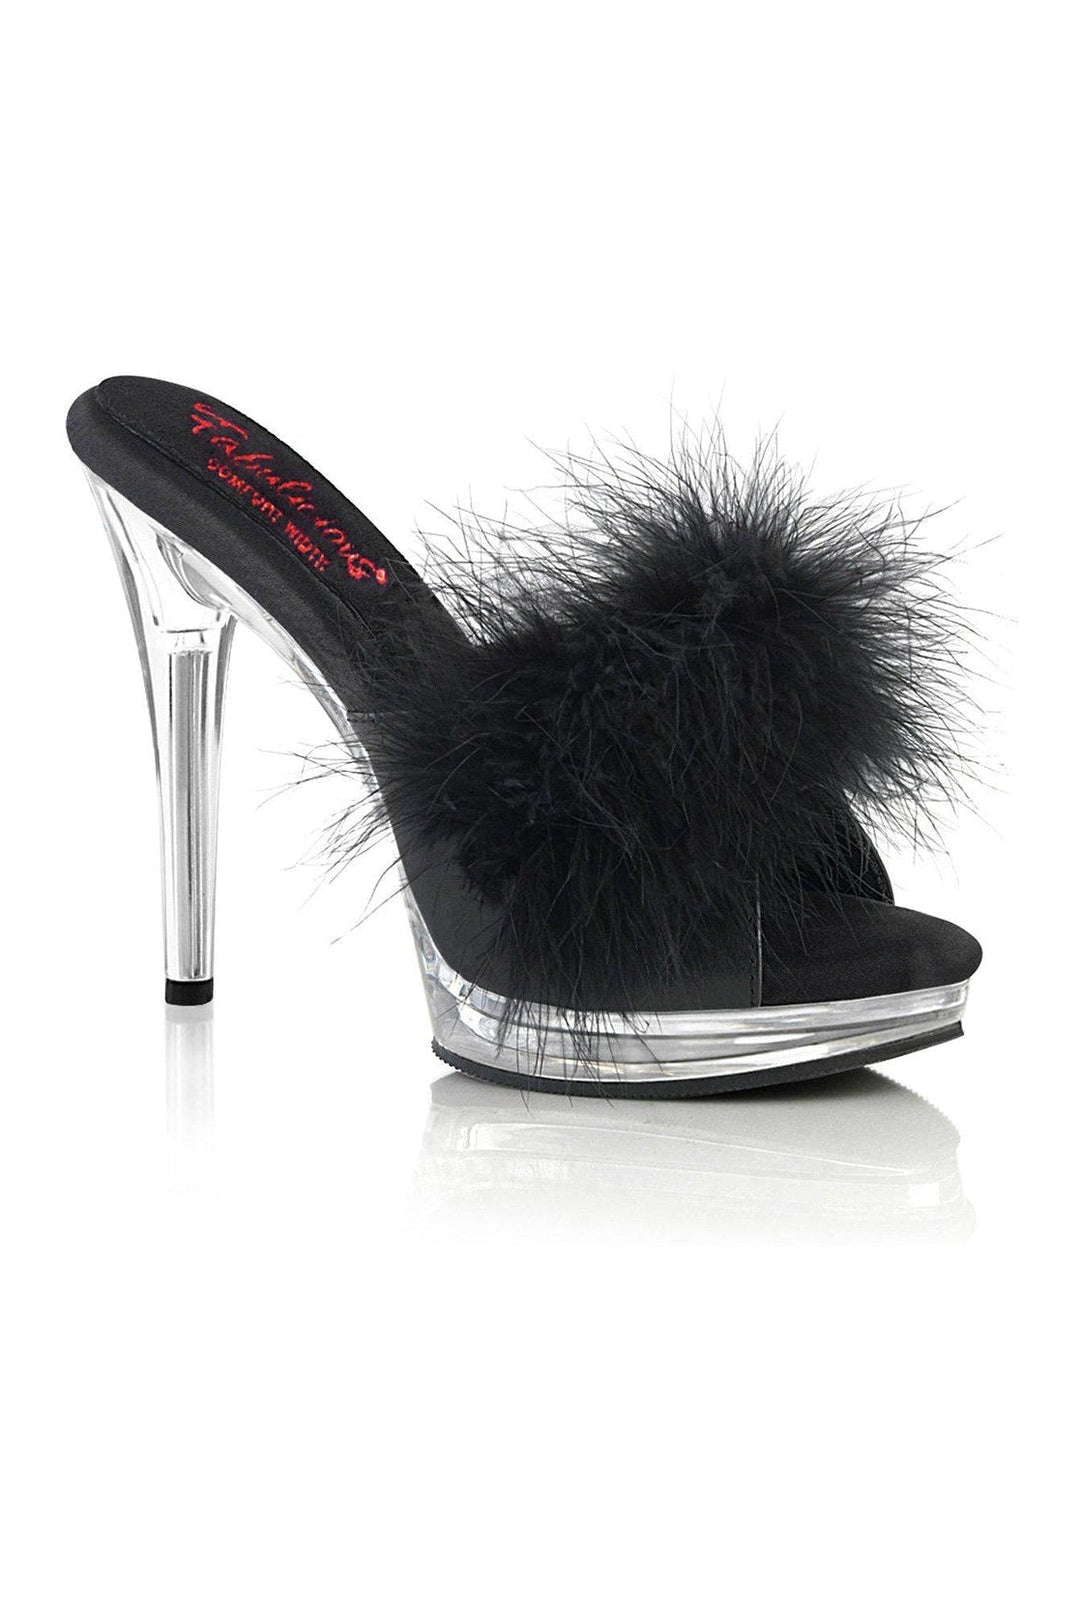 GLORY-501F-8 Slide | Black Faux Leather-Slides-Fabulicious-Black-7-Faux Leather-SEXYSHOES.COM